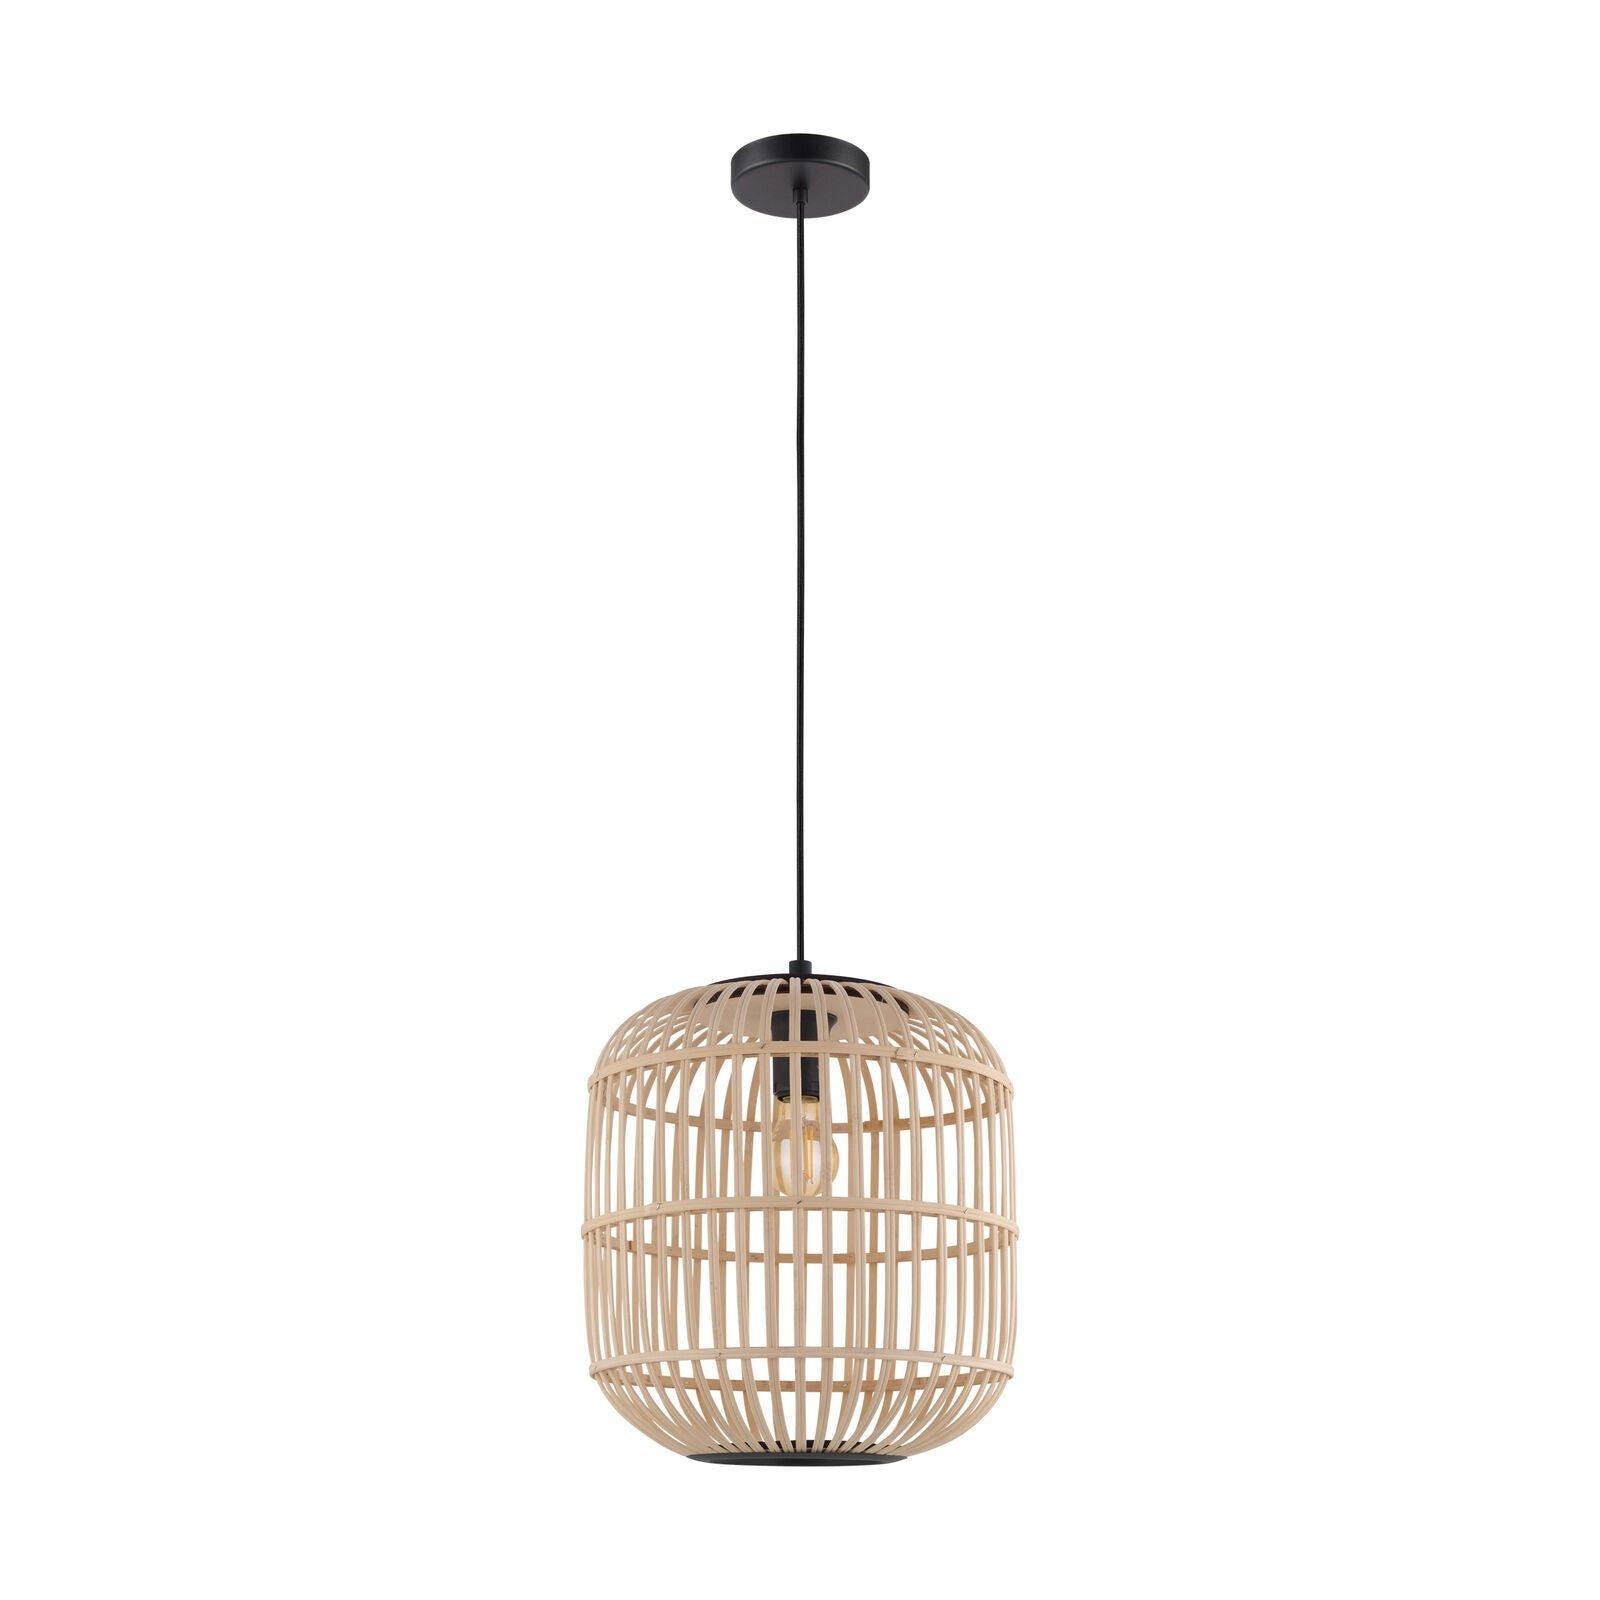 Hanging Ceiling Pendant Light Black & Wicker Cage 1 x 28W E27 Feature Lamp